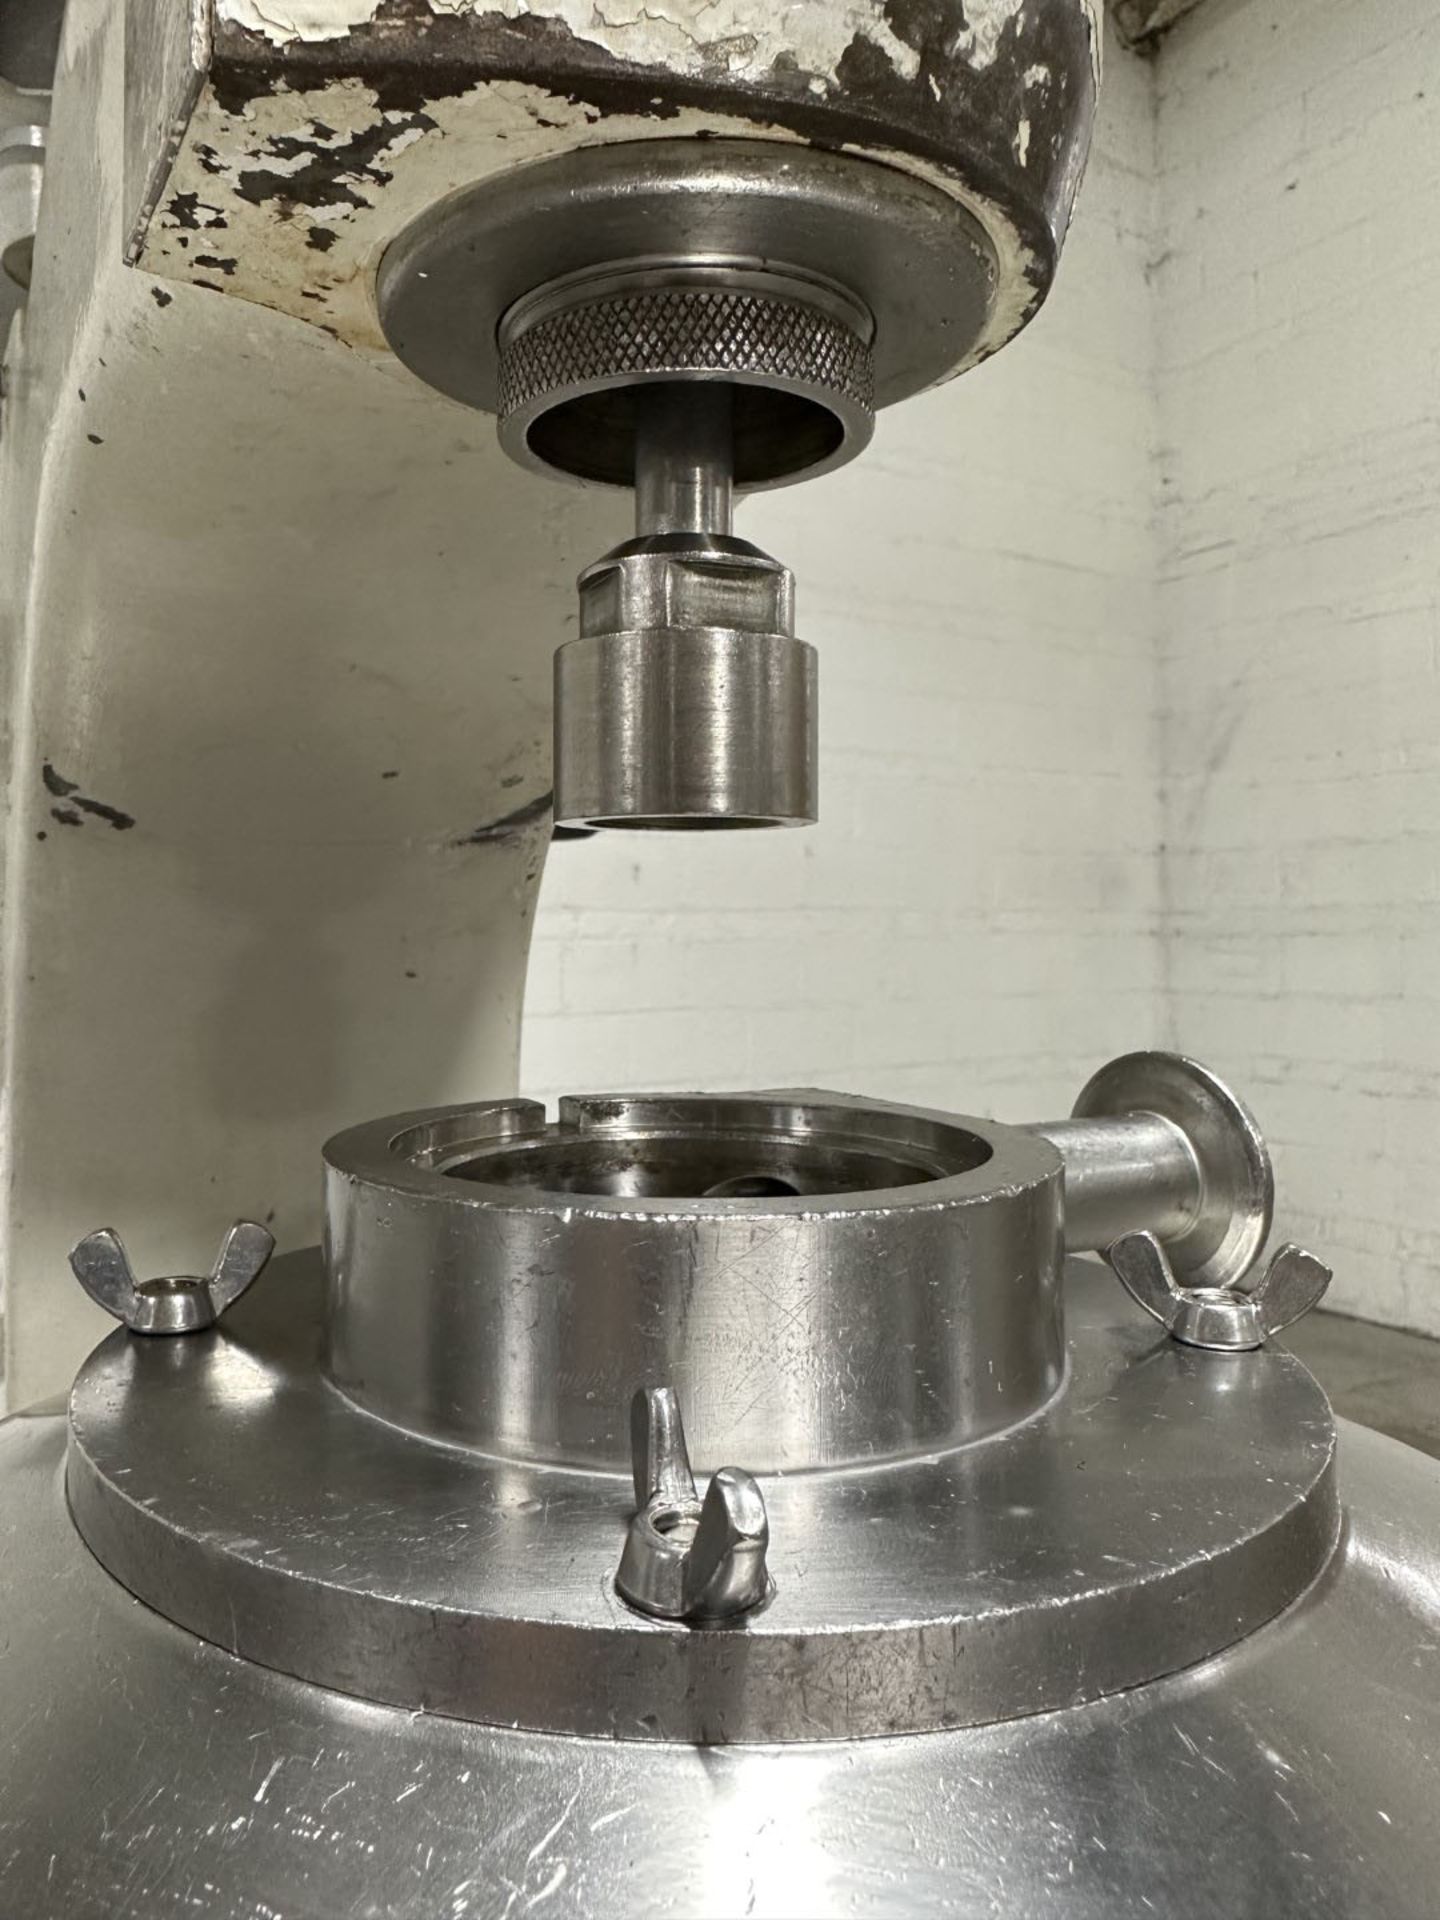 Sharples vaporite super centrifuge, model AS16VB, stainless steel construction, 17000 RPM max speed, - Image 9 of 20